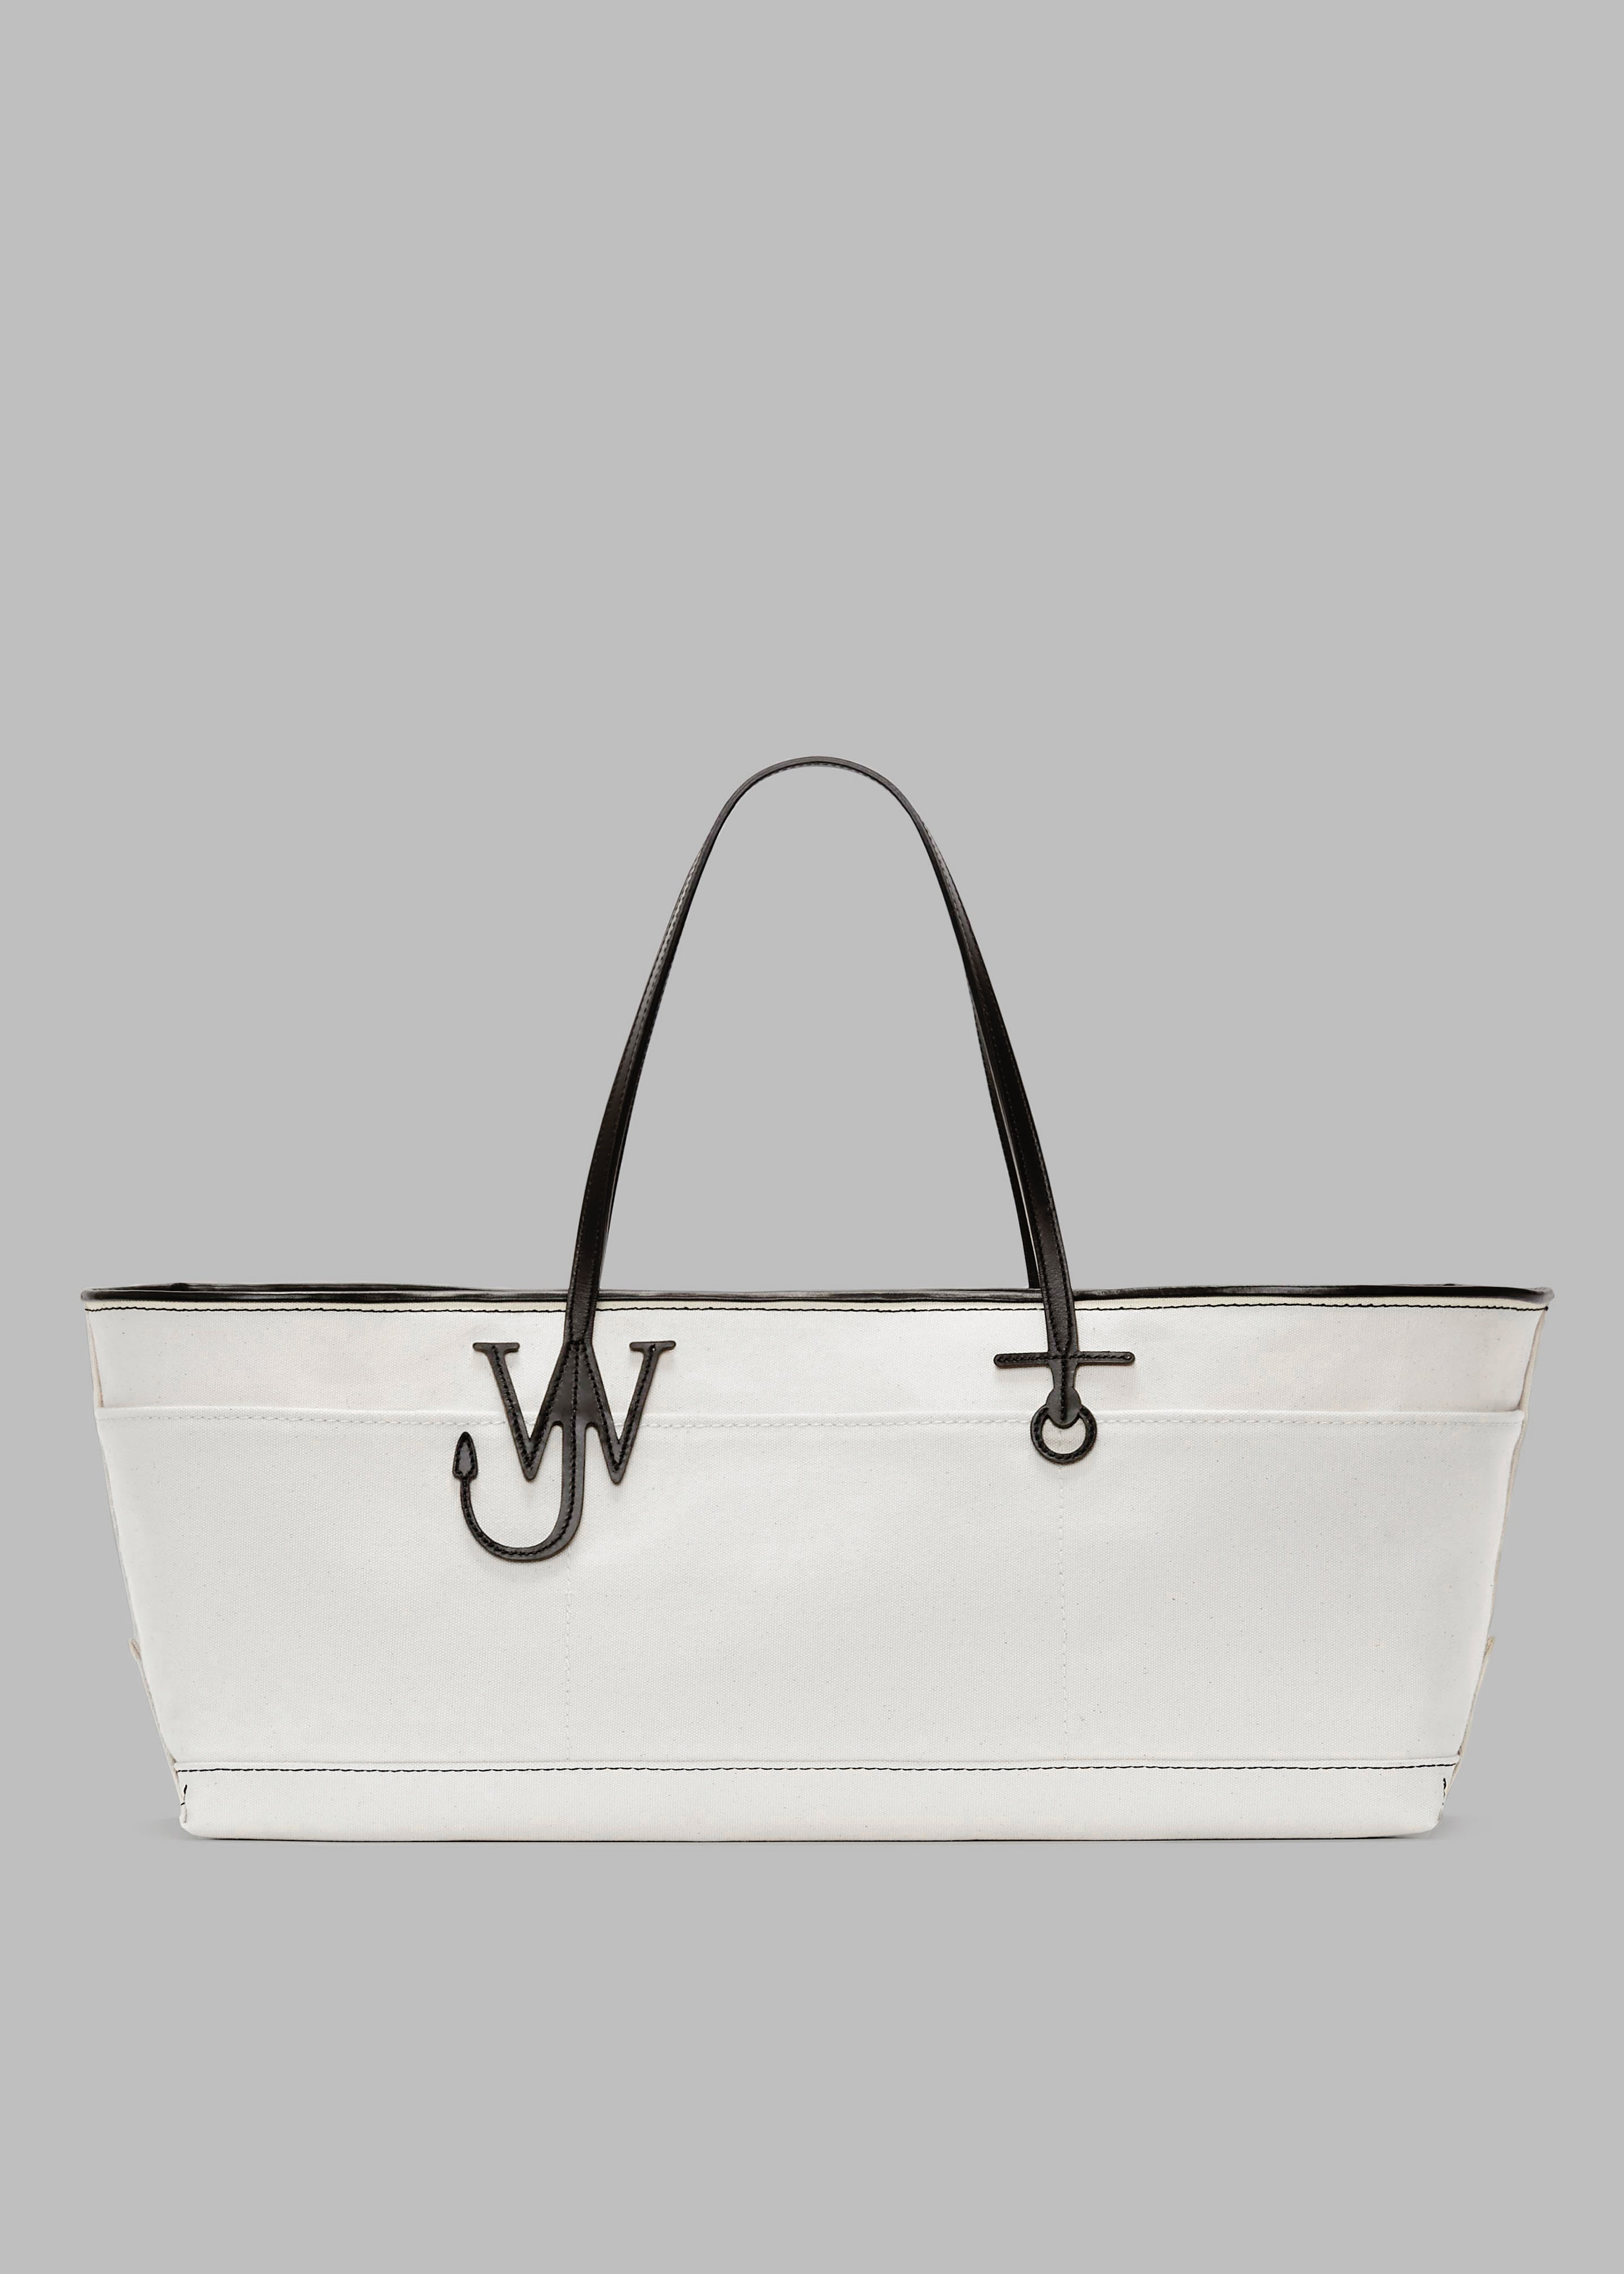 JW Anderson Anchor Stretch Tote - Natural/Black - 3